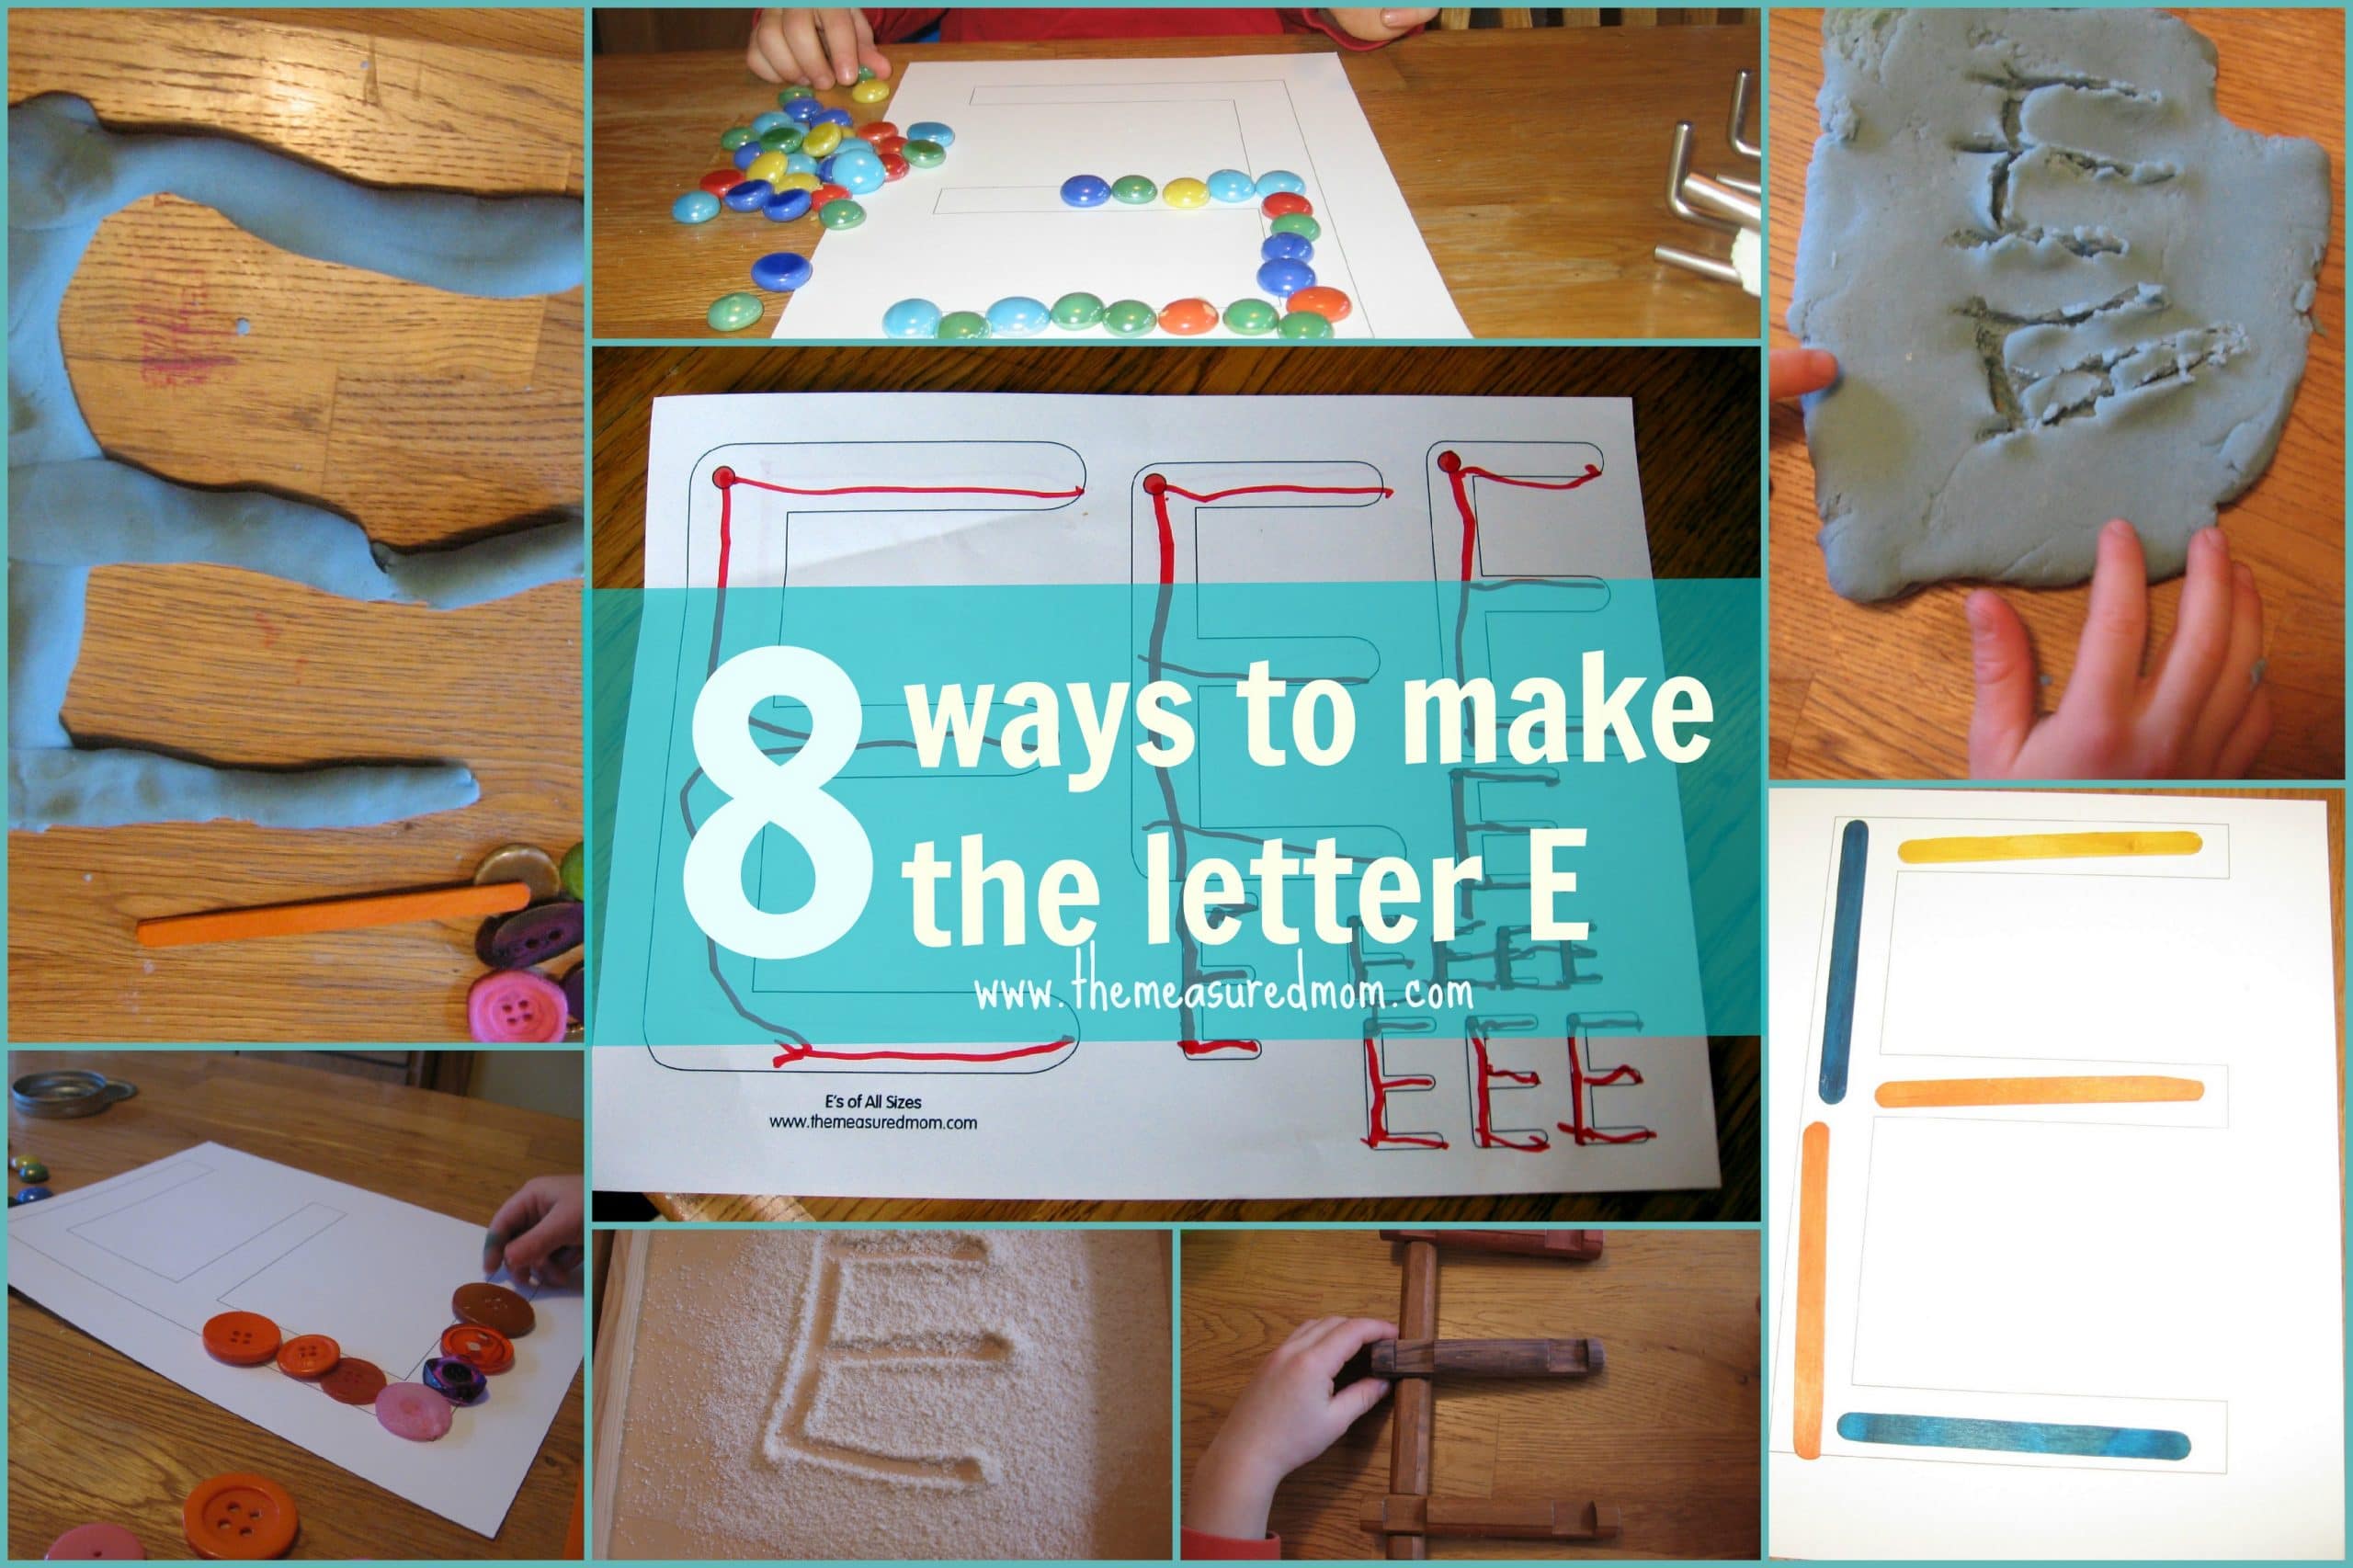 8 Ways to Make the Letter E - The Measured Mom